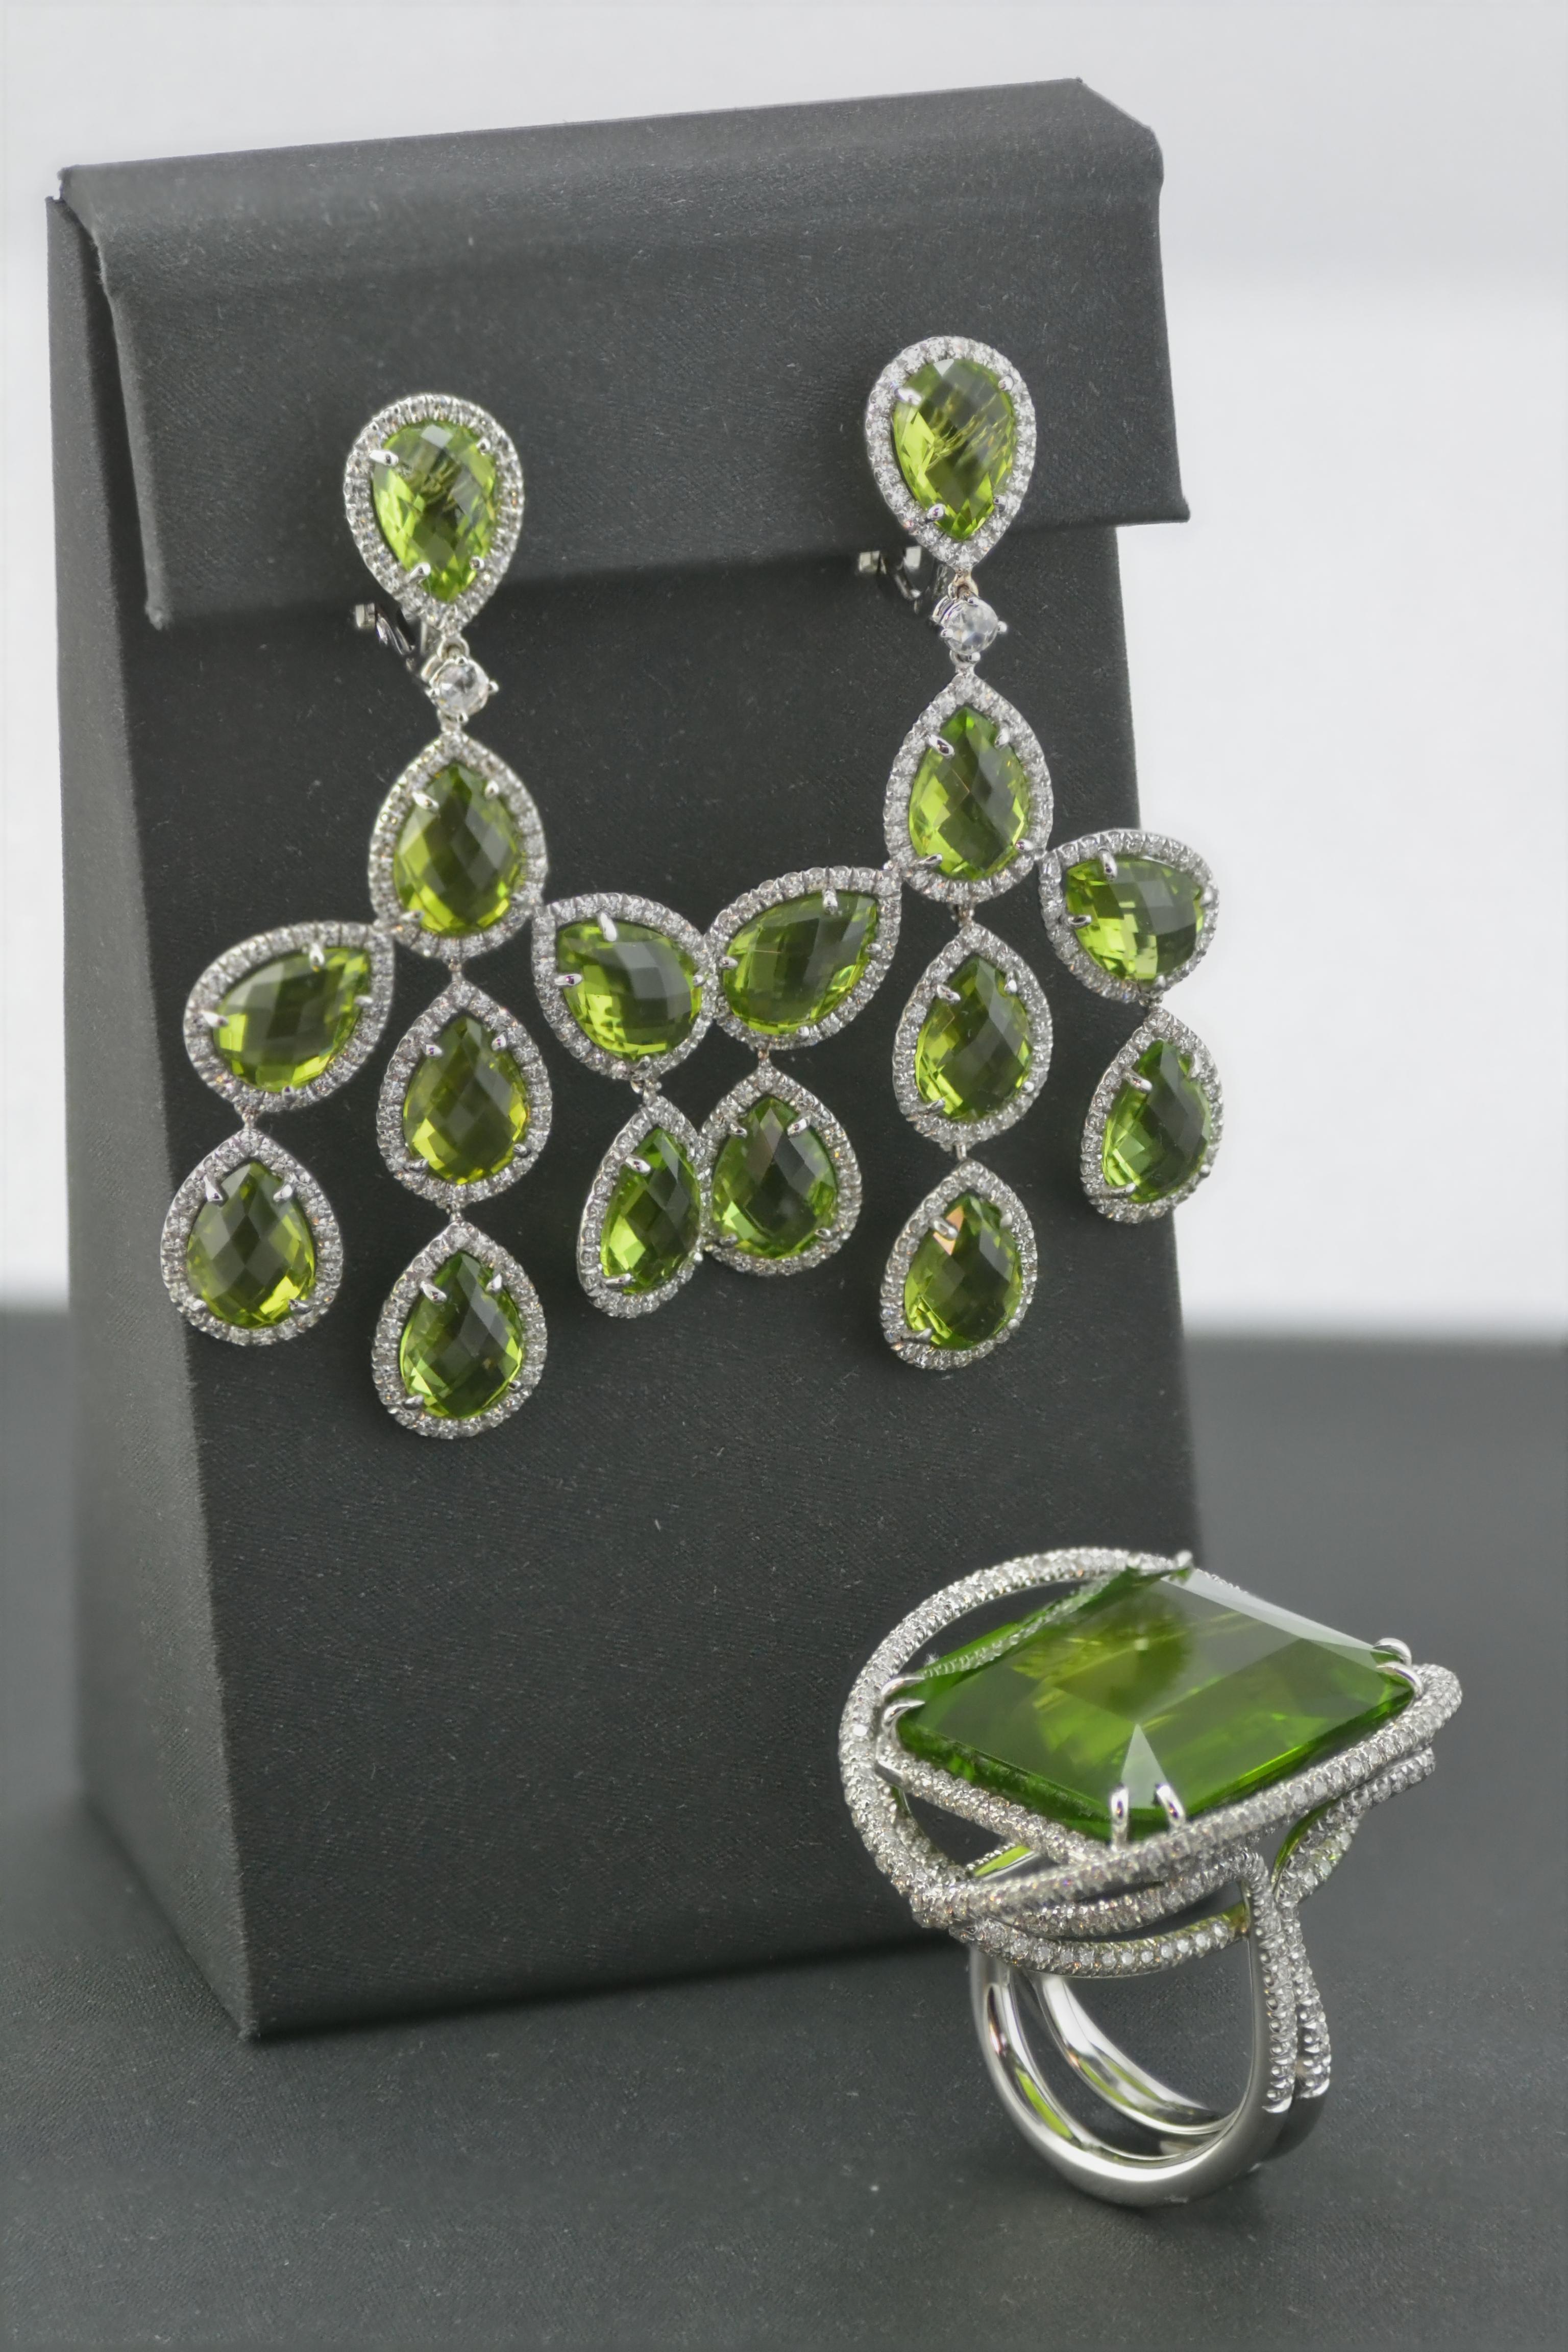 Vivid and brilliant chandelier earrings handcrafted in Italy in 18 kt white gold for a total of g 13,90 
they are set with number 368 diamonds for a total of  ct 2,06  and number 2 rose cut ct 0,12 - 
the briolette cut peridots are 16  for total